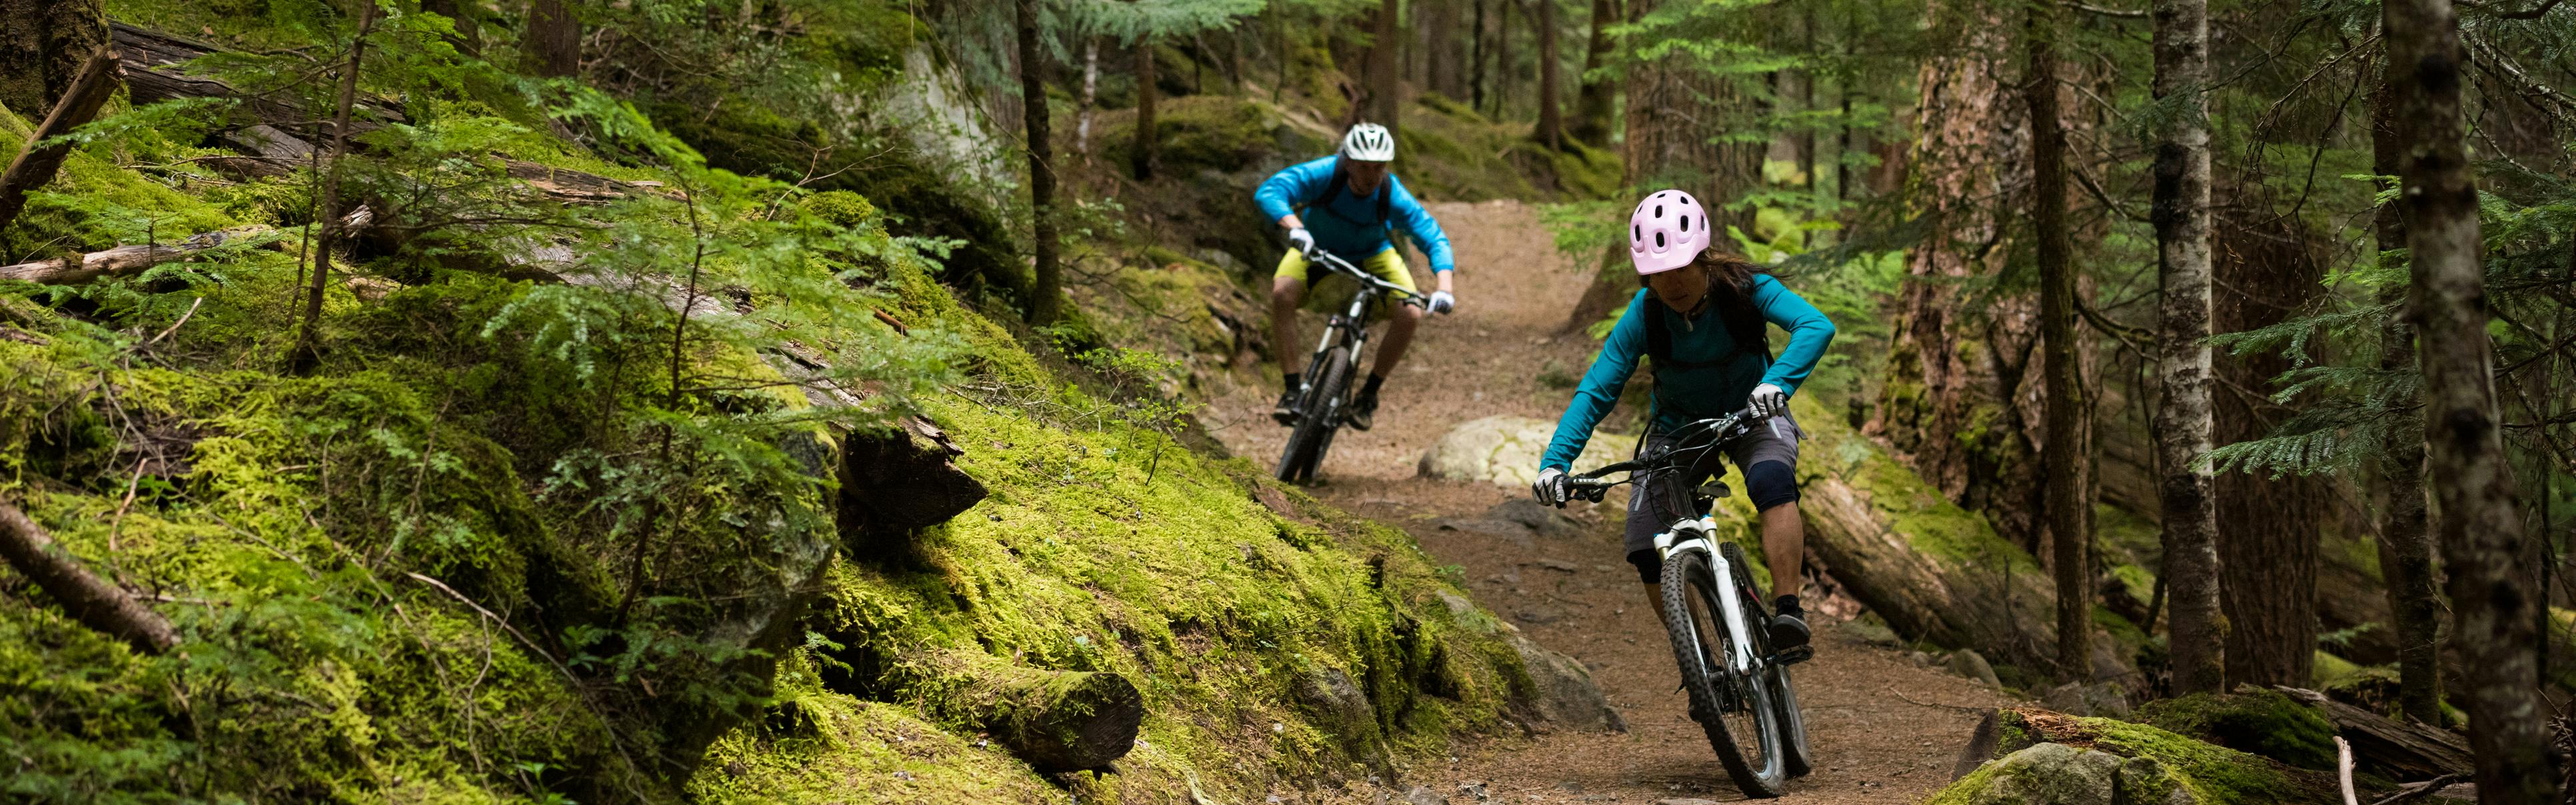 Two mountain bikers ride down a trail with mossy hills on either side